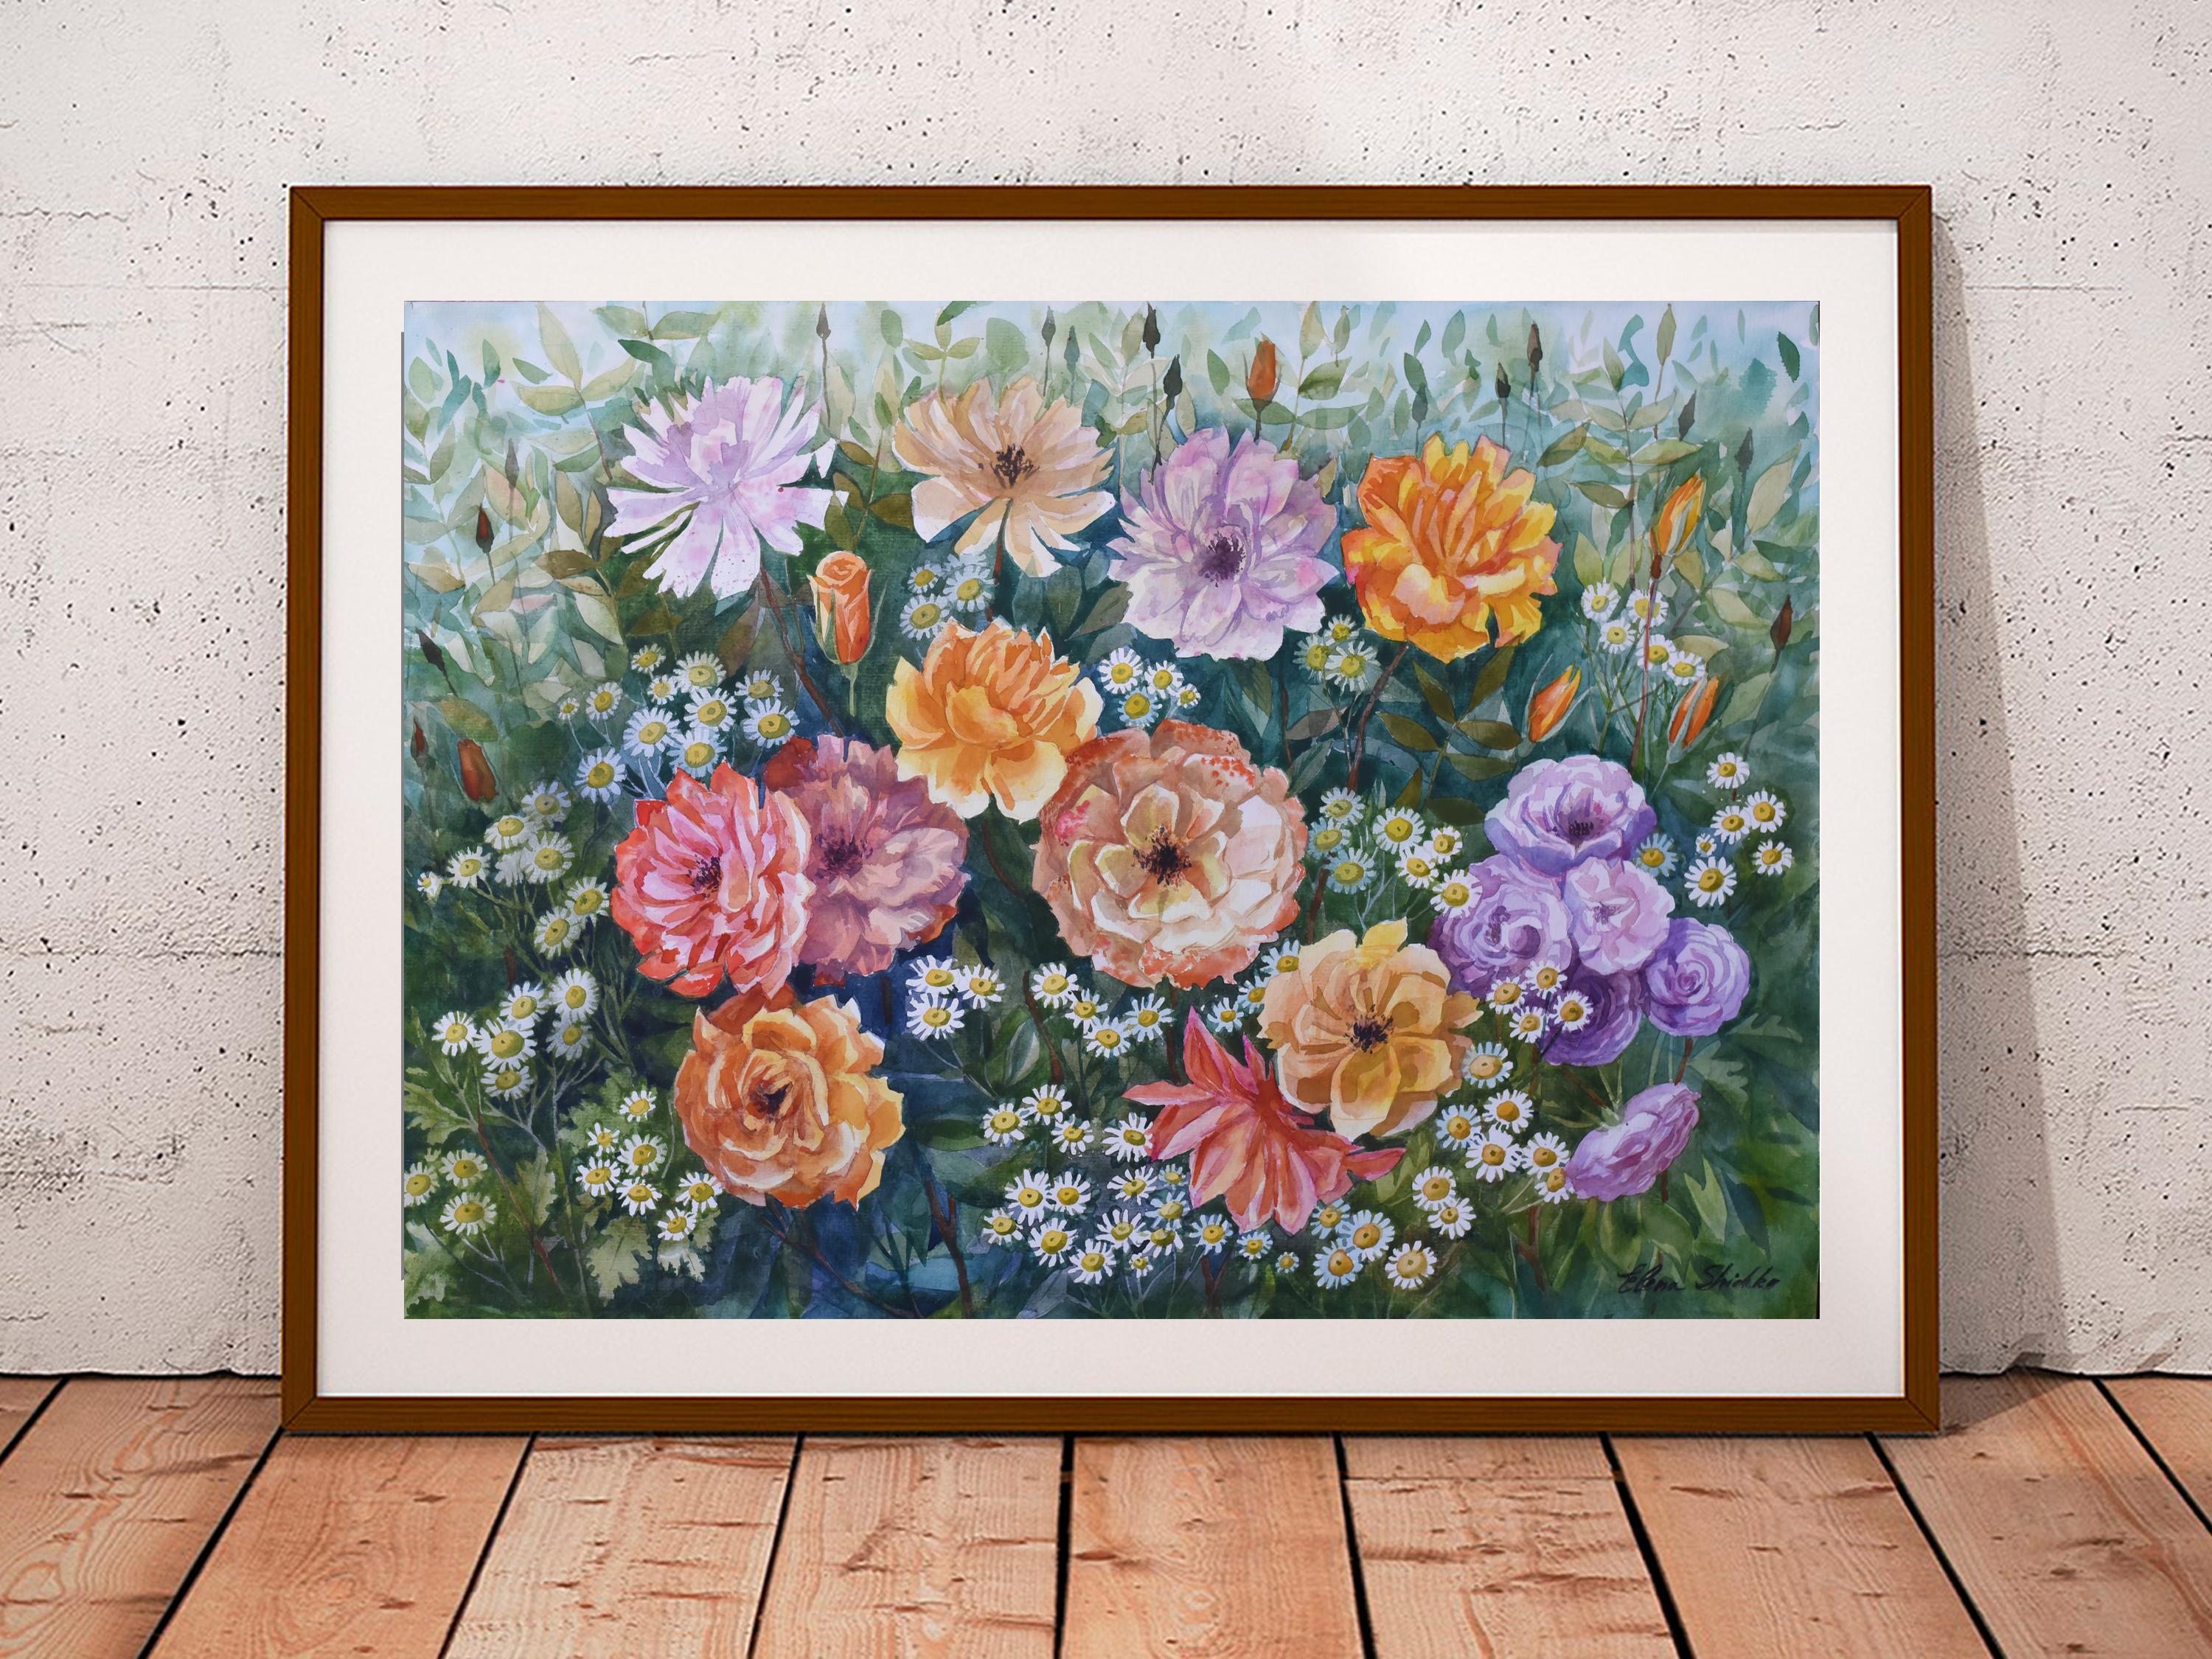 Roses from my garden
Original watercolor painted on professional watercolor paper

When I start a new watercolor, I go to my garden and try to find a new topic. Every day something unusual happens there, new flowers bloom, the seasons change. My